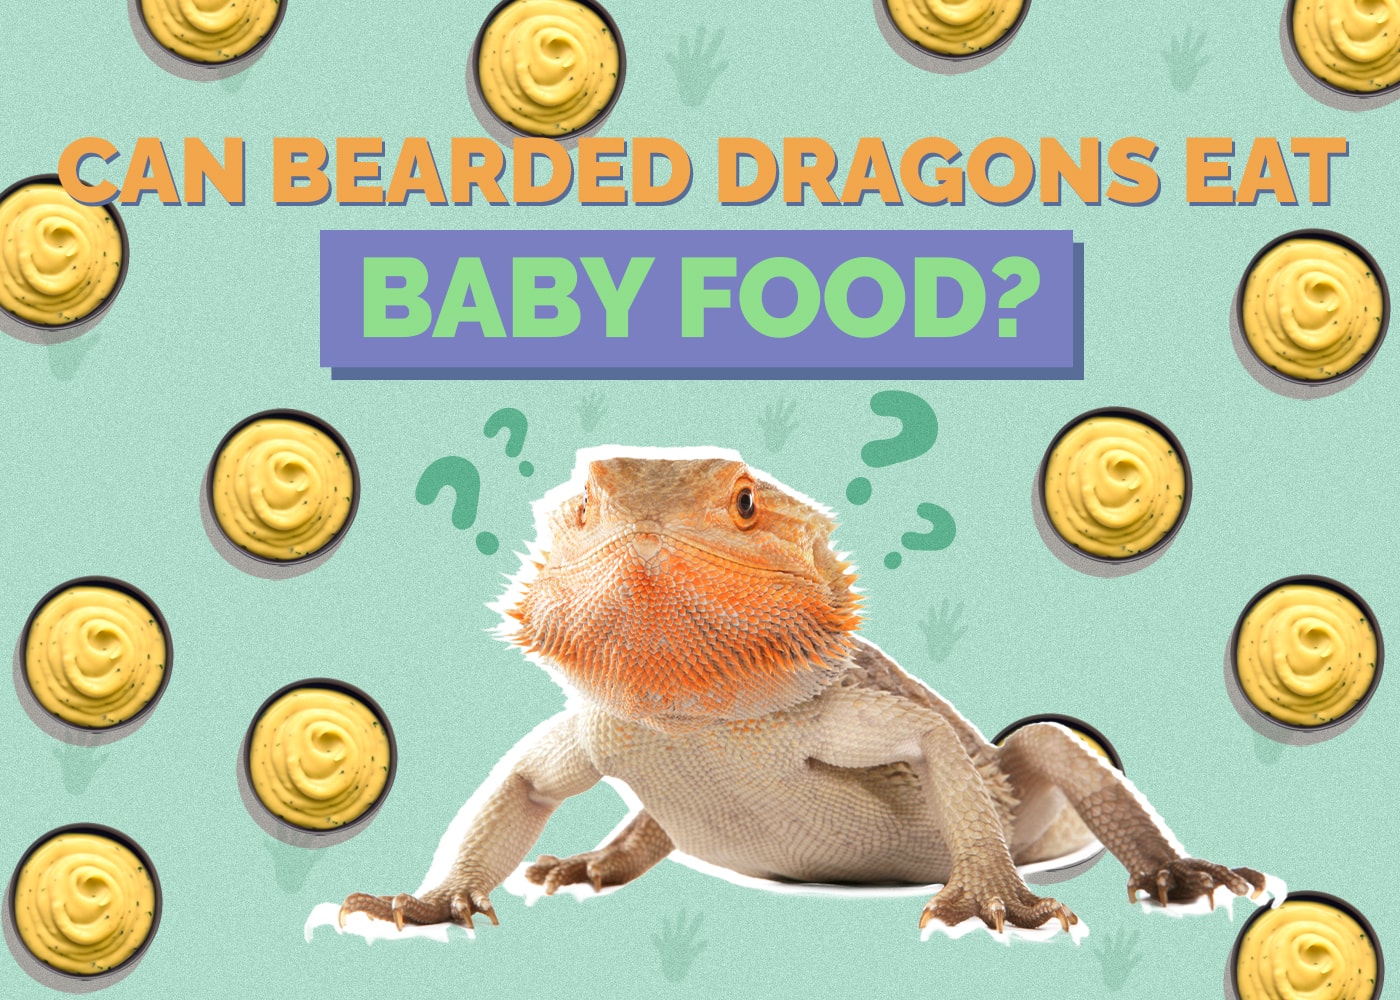 Can Bearded Dragons Eat Baby Food